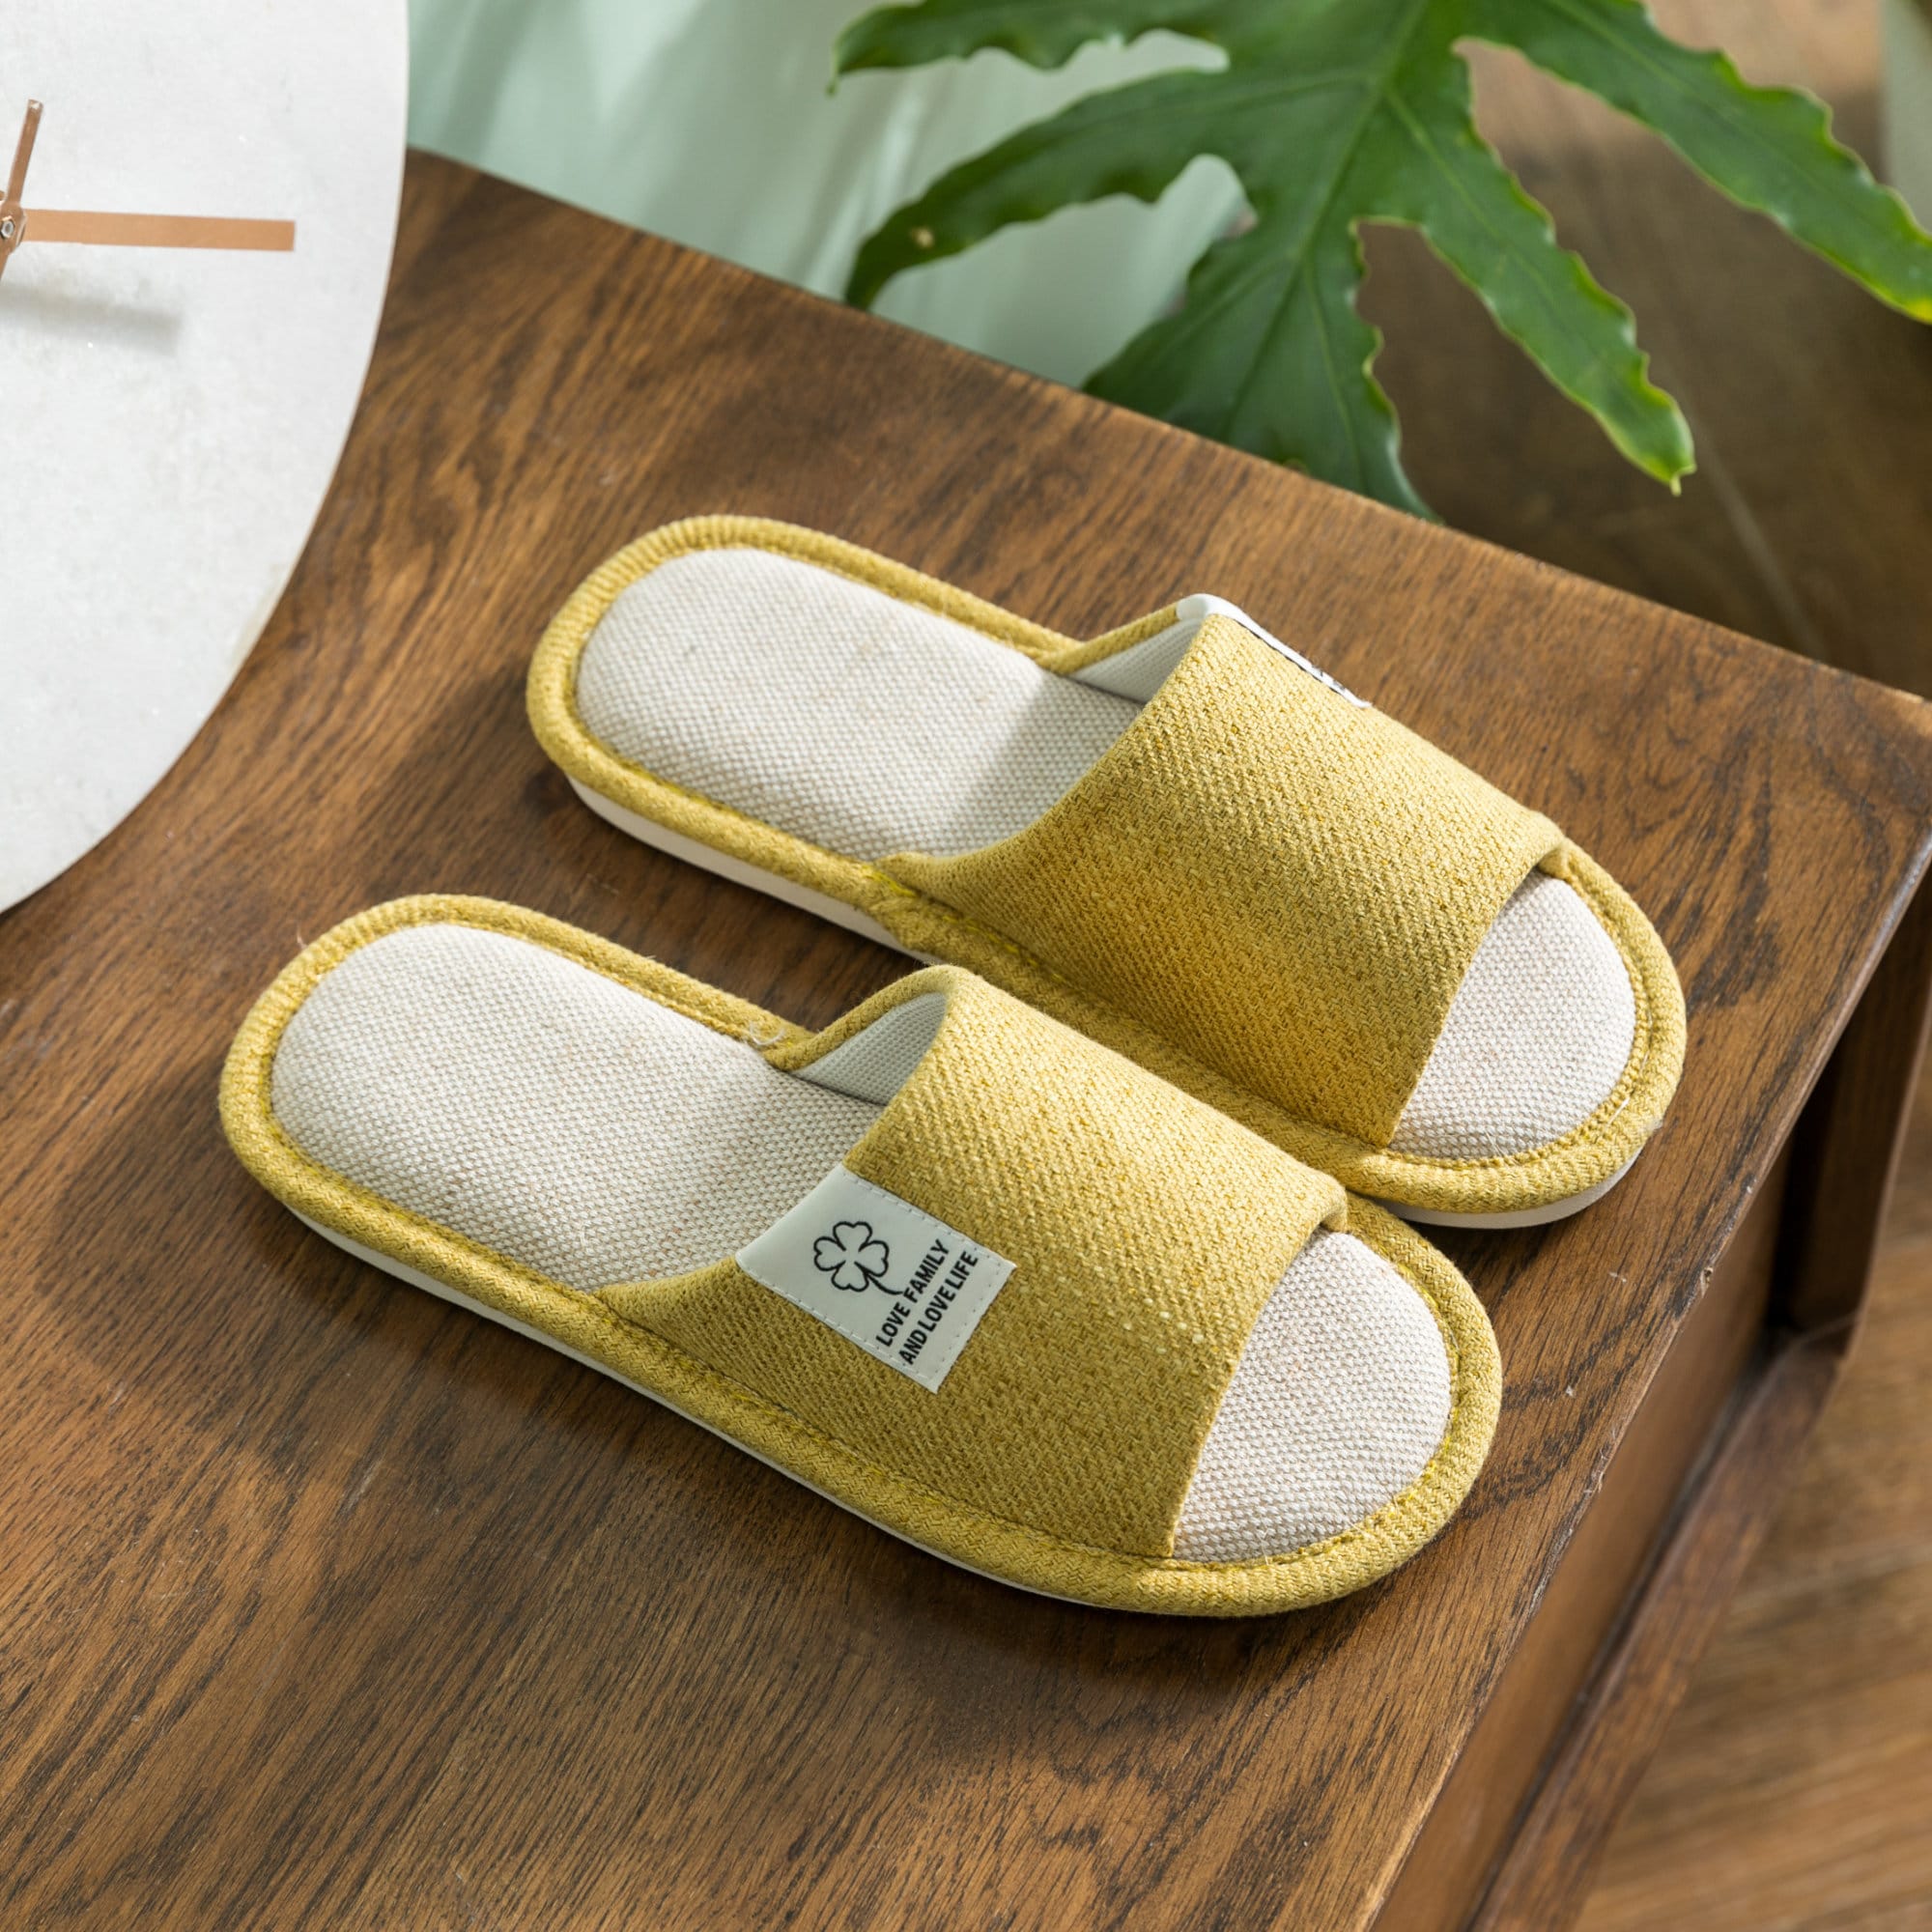 Gahrchian Women Cotton Linen Slippers Shoes Indoors Slip-ons Slippers Flat Slippers Sandals Summers Bamboo Slippers 